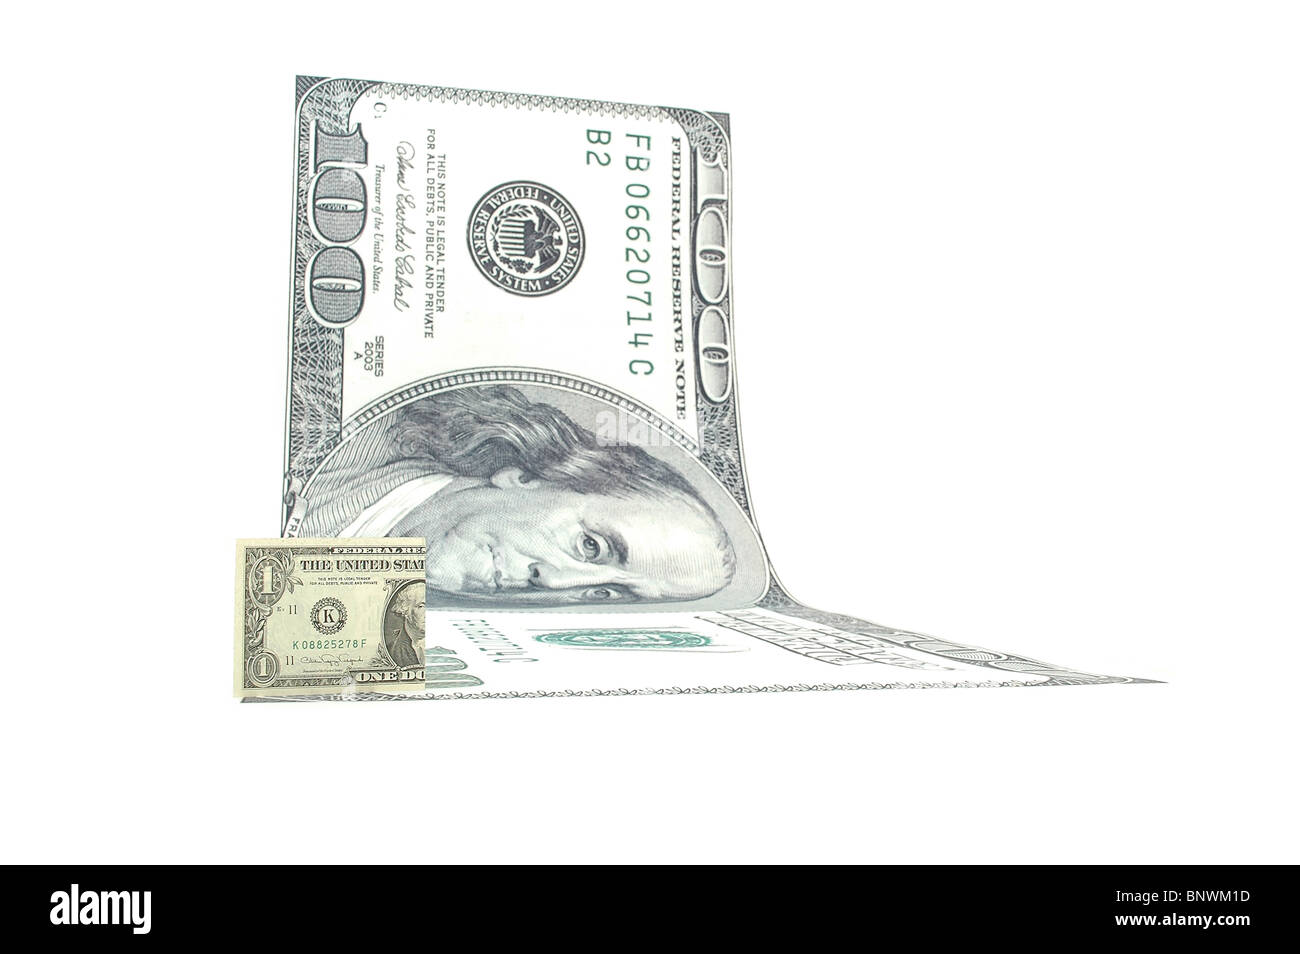 One American Dollar Bill On Top Of A Big 100 Dollar Bill Isolated On A Clean White Background